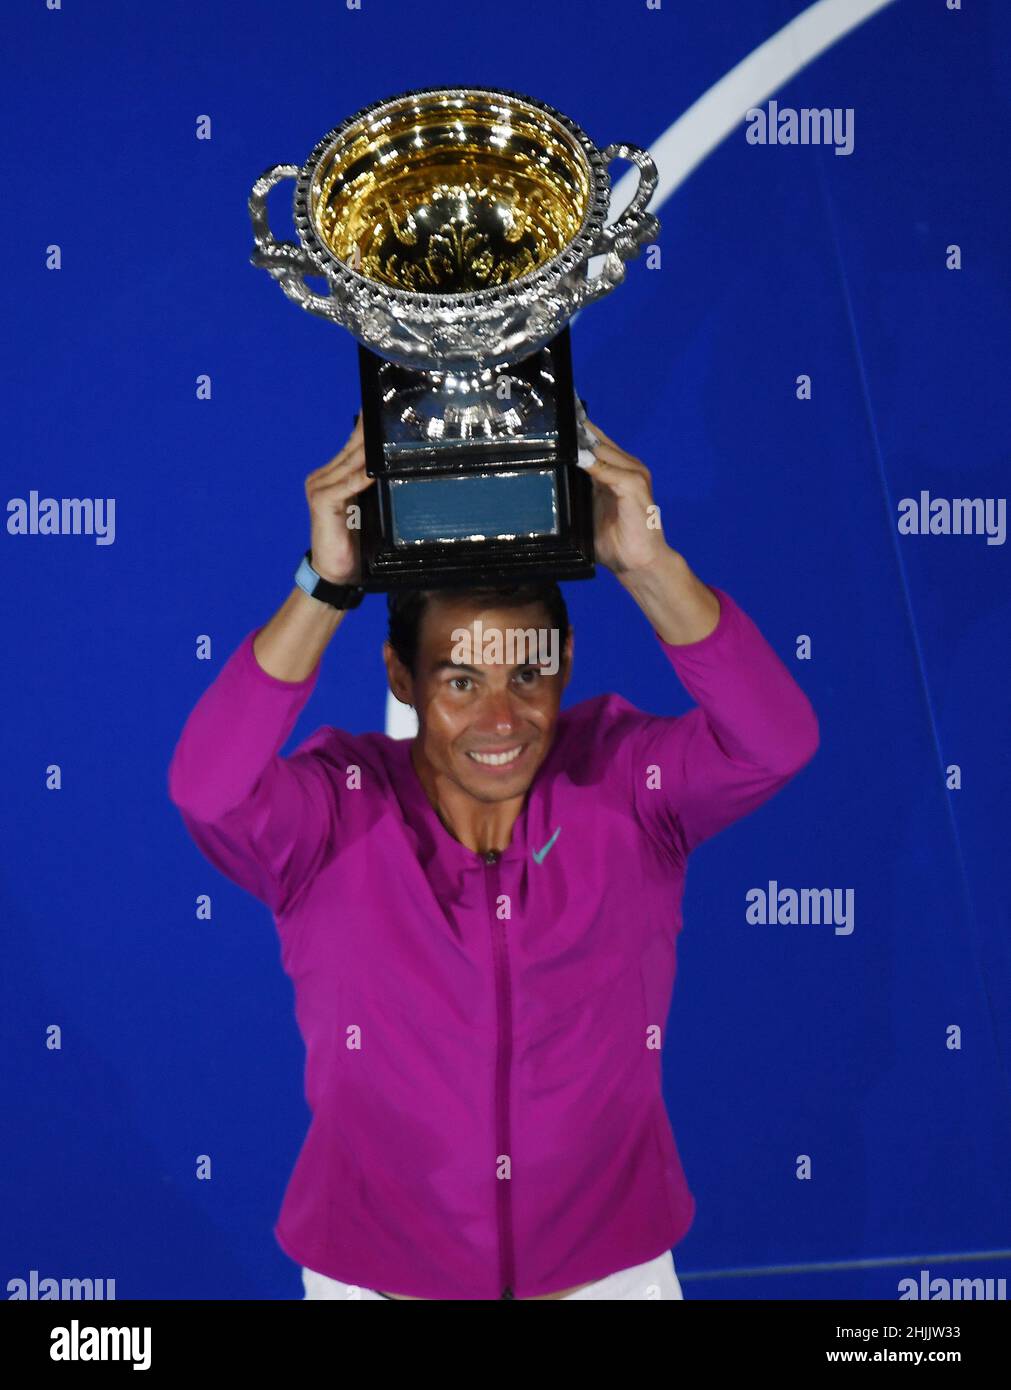 Melbourne, Australia. 30th Jan, 2022. Australian Open Melbourne Park Day 14 30/01/2022 Mens Singles Final Rafa Nadal (ESP) with Norman Brookes Trophy after he wins a record 21st Grand Slam title Credit: Roger Parker/Alamy Live News Stock Photo